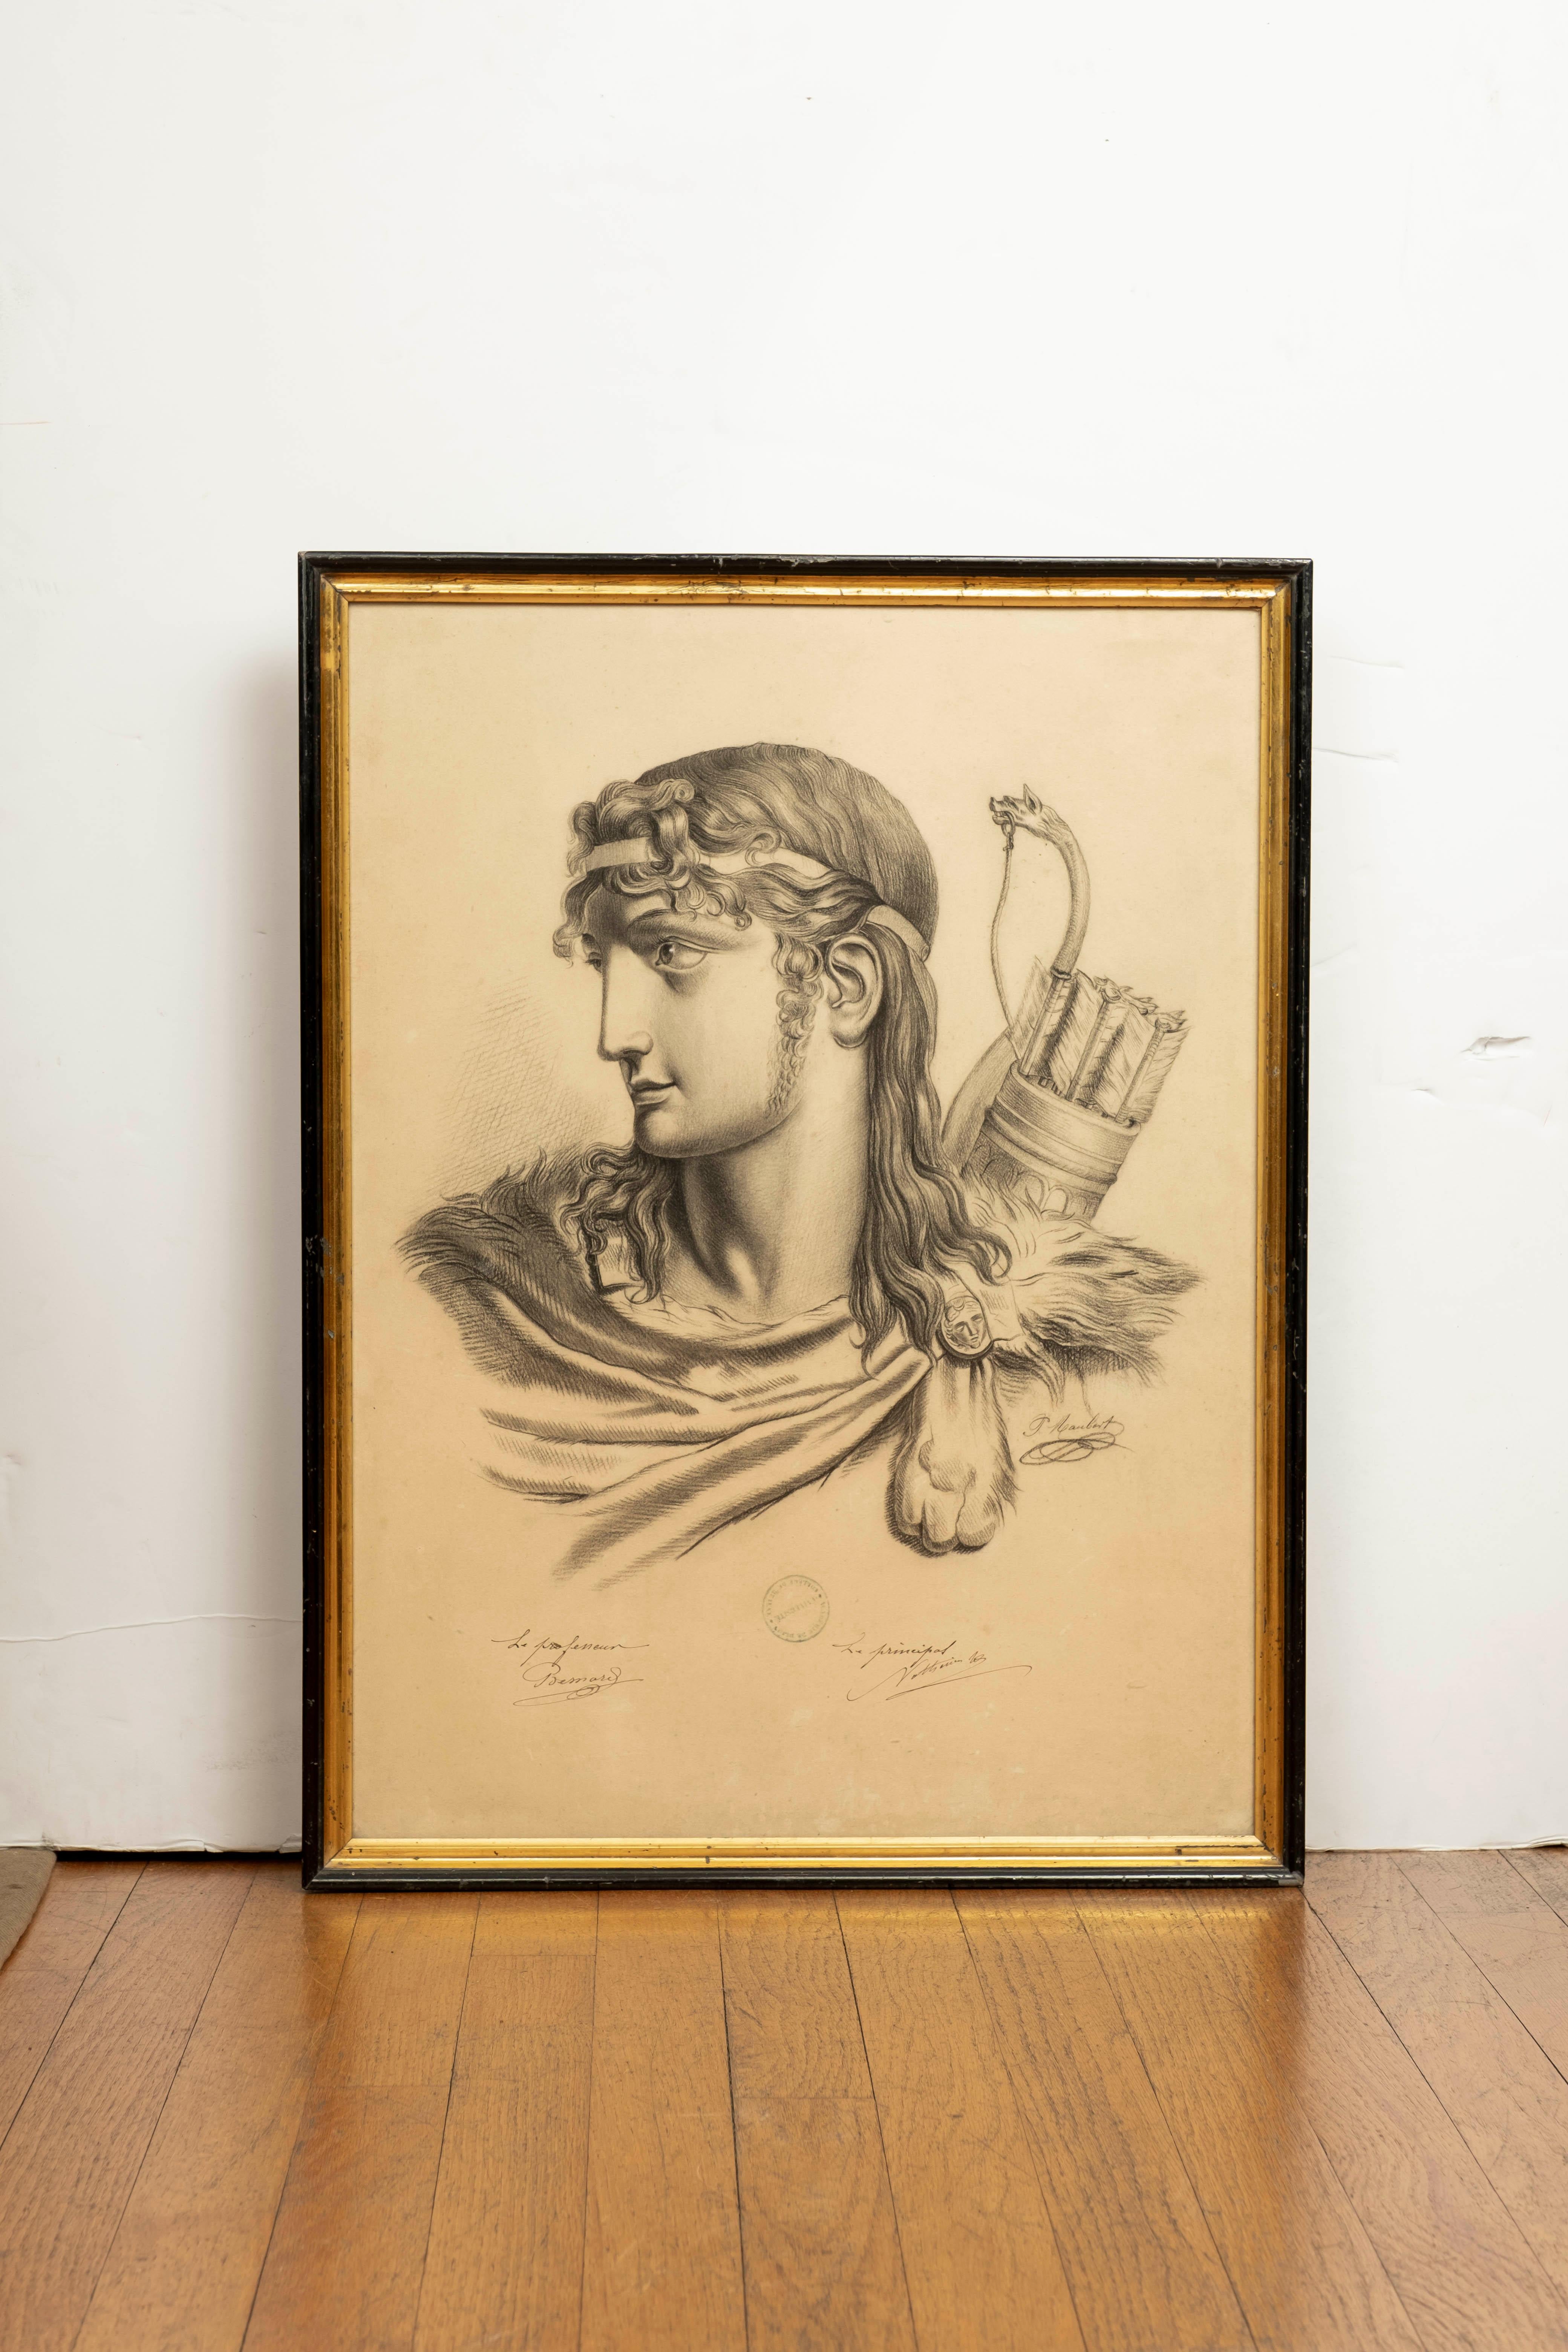 French academic drawing of a classical Roman. This handsome framed French drawing of a classical roman figure was created by a talented artist in the 1920s and signed. Stunning!